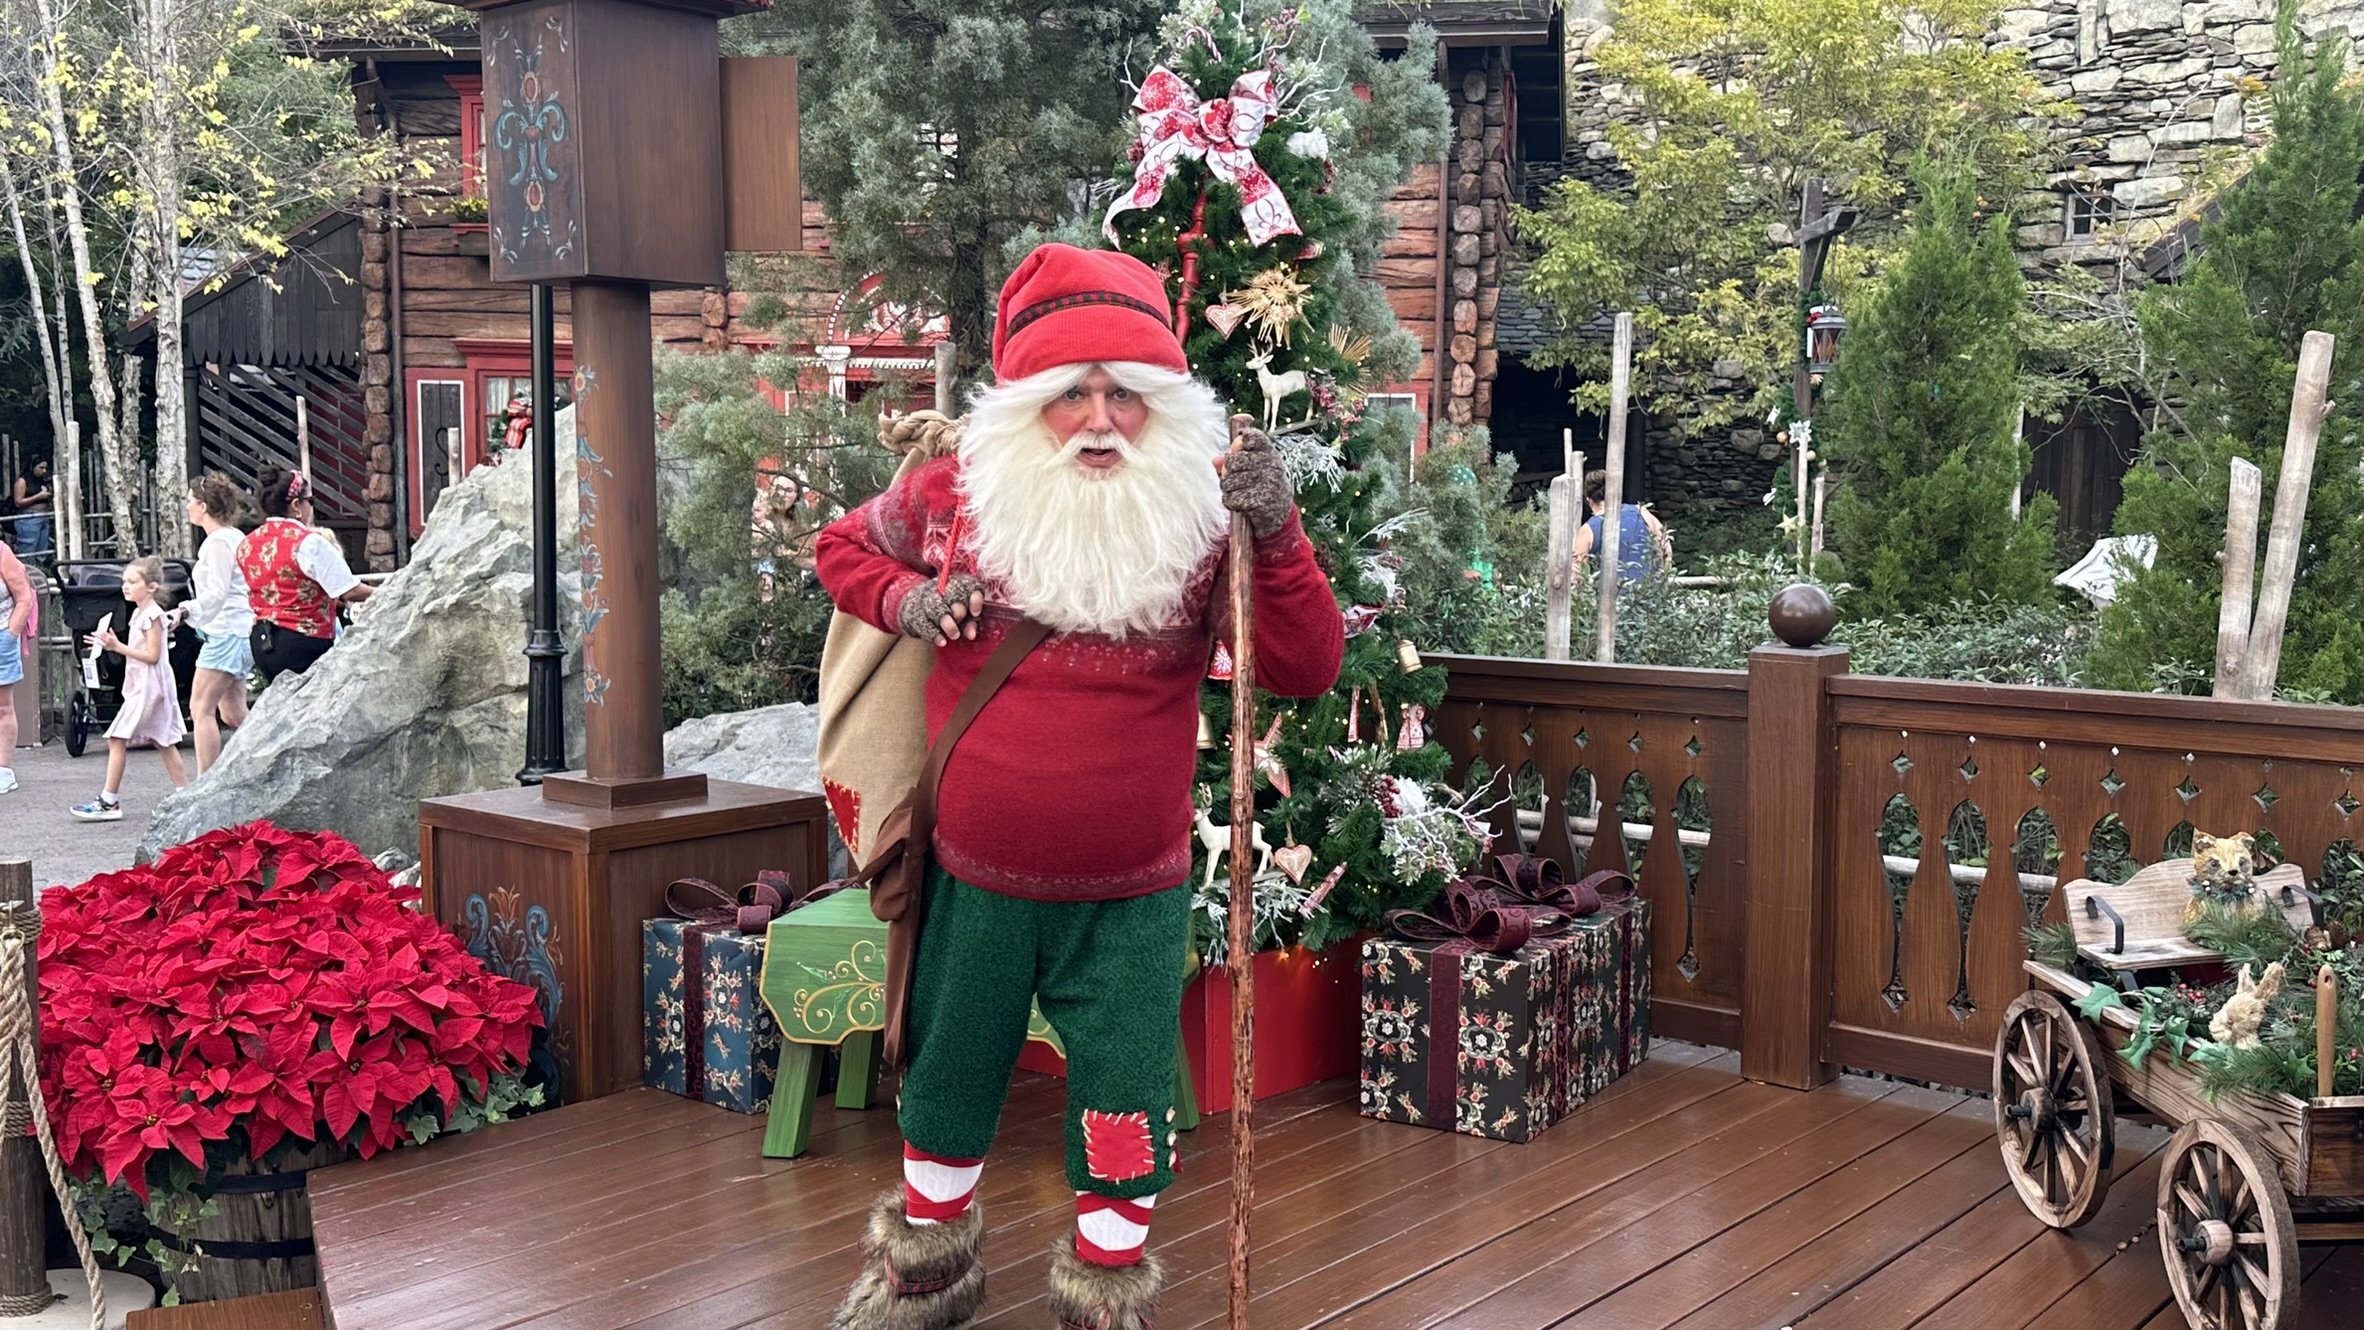 Norway's Holiday Tale Join Sigrid in an Yuletide Story with a Trickster Barn Santa at World Showcase